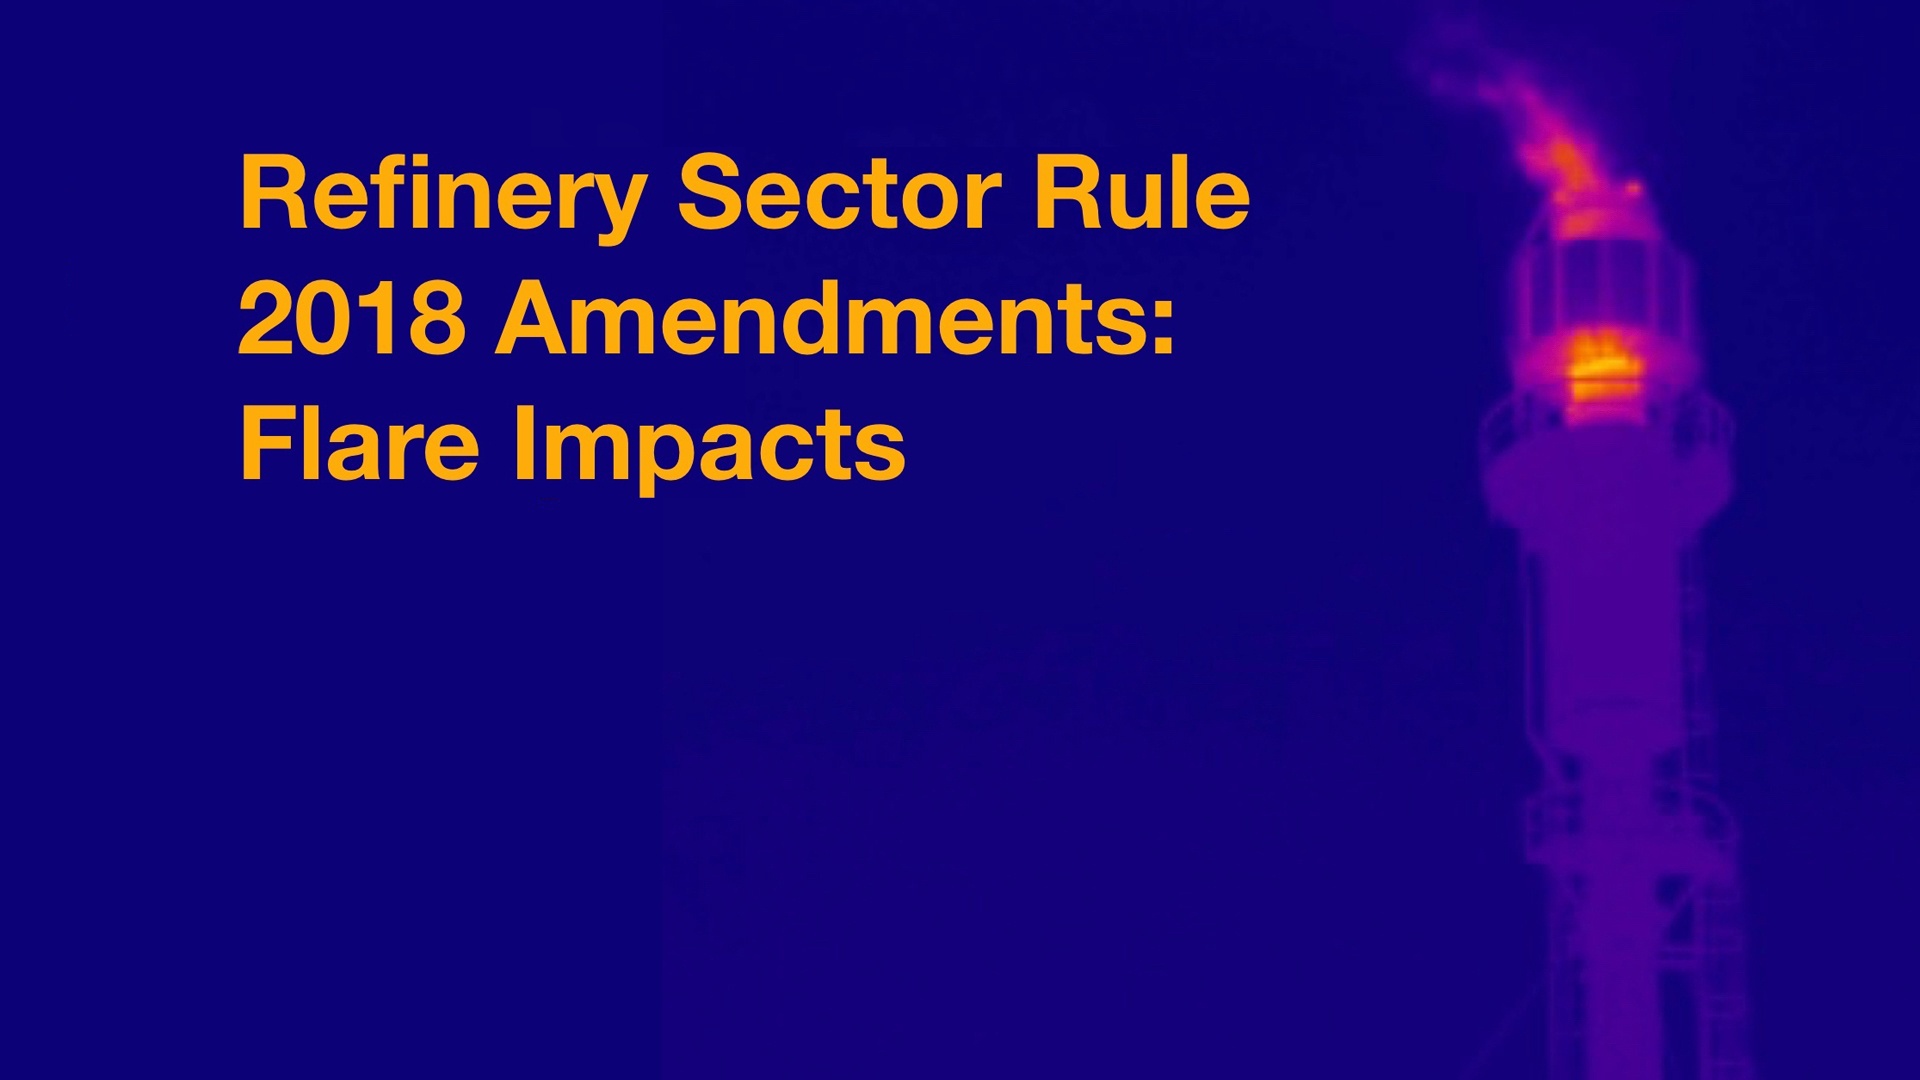 Refinery Sector Rule 2018 Amendments: Flare Impacts